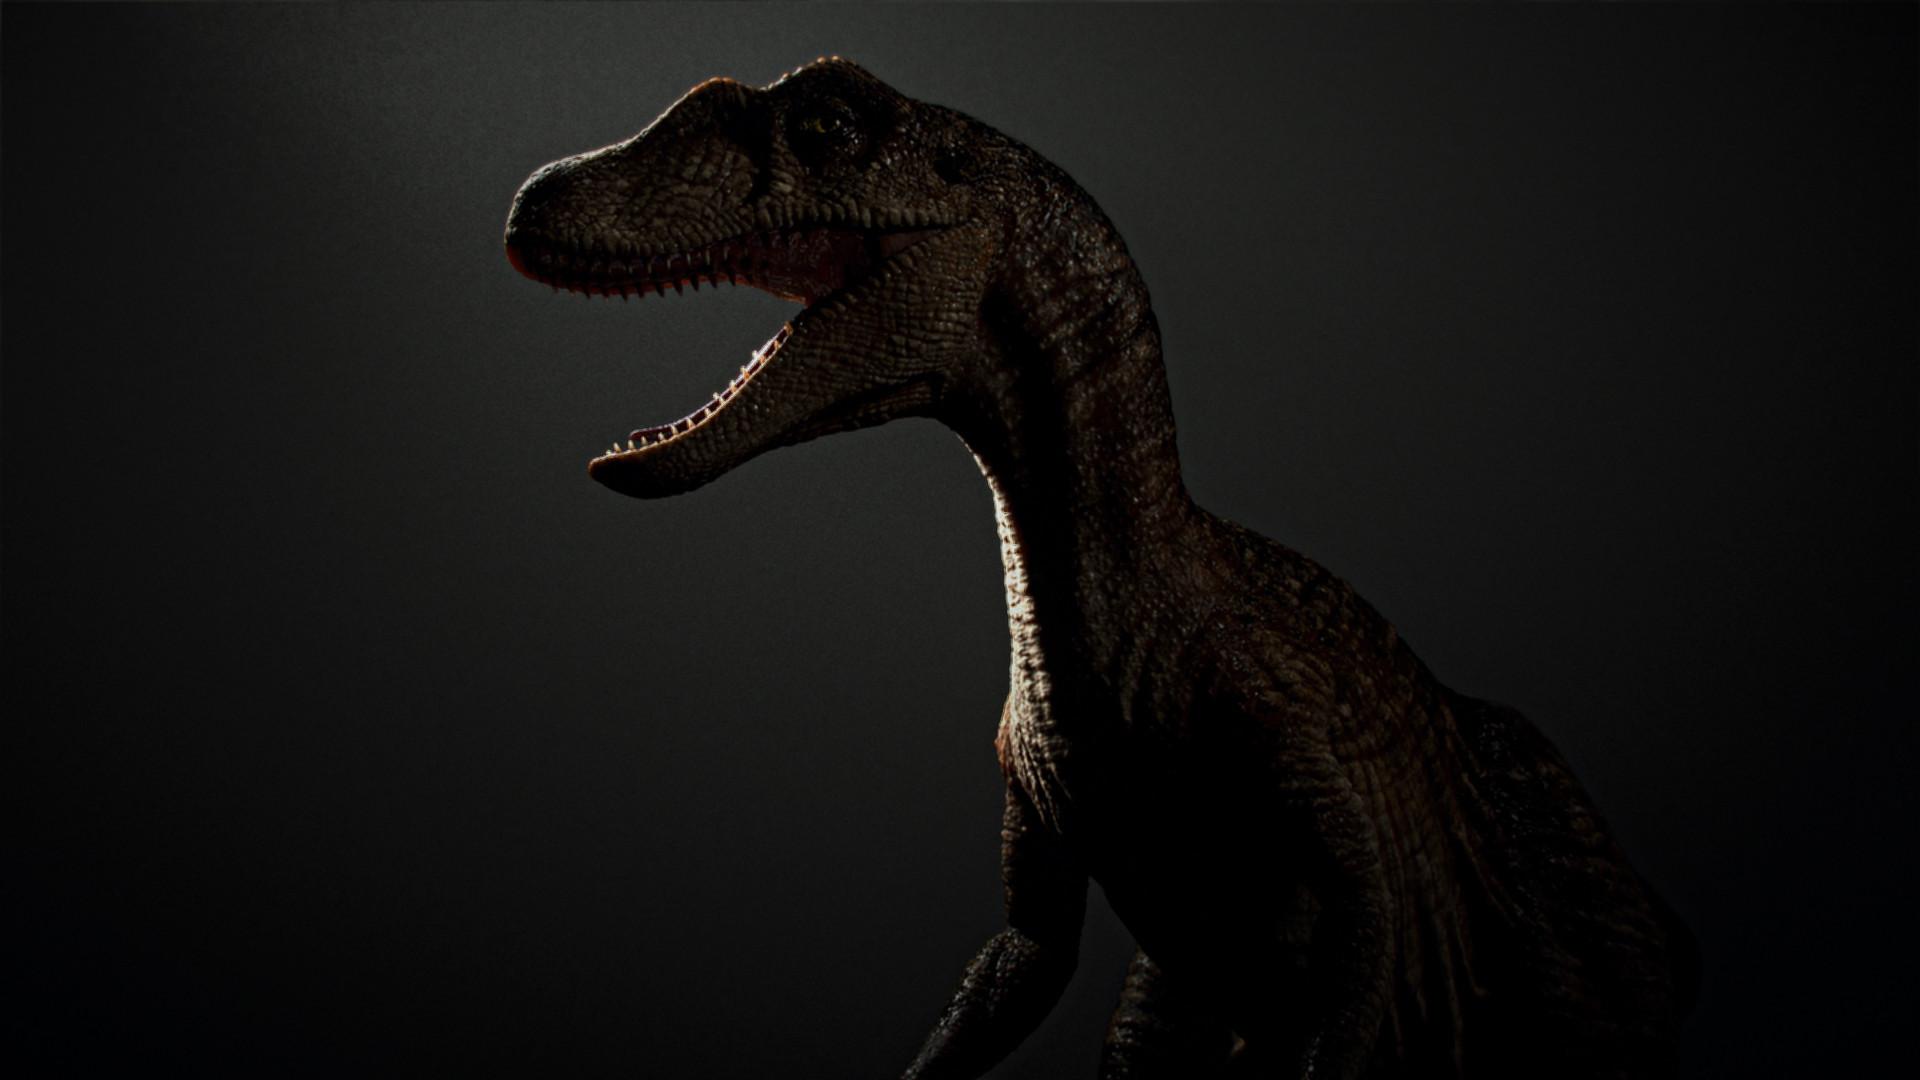 Raptor for Canal commercial, Robert Pashayan